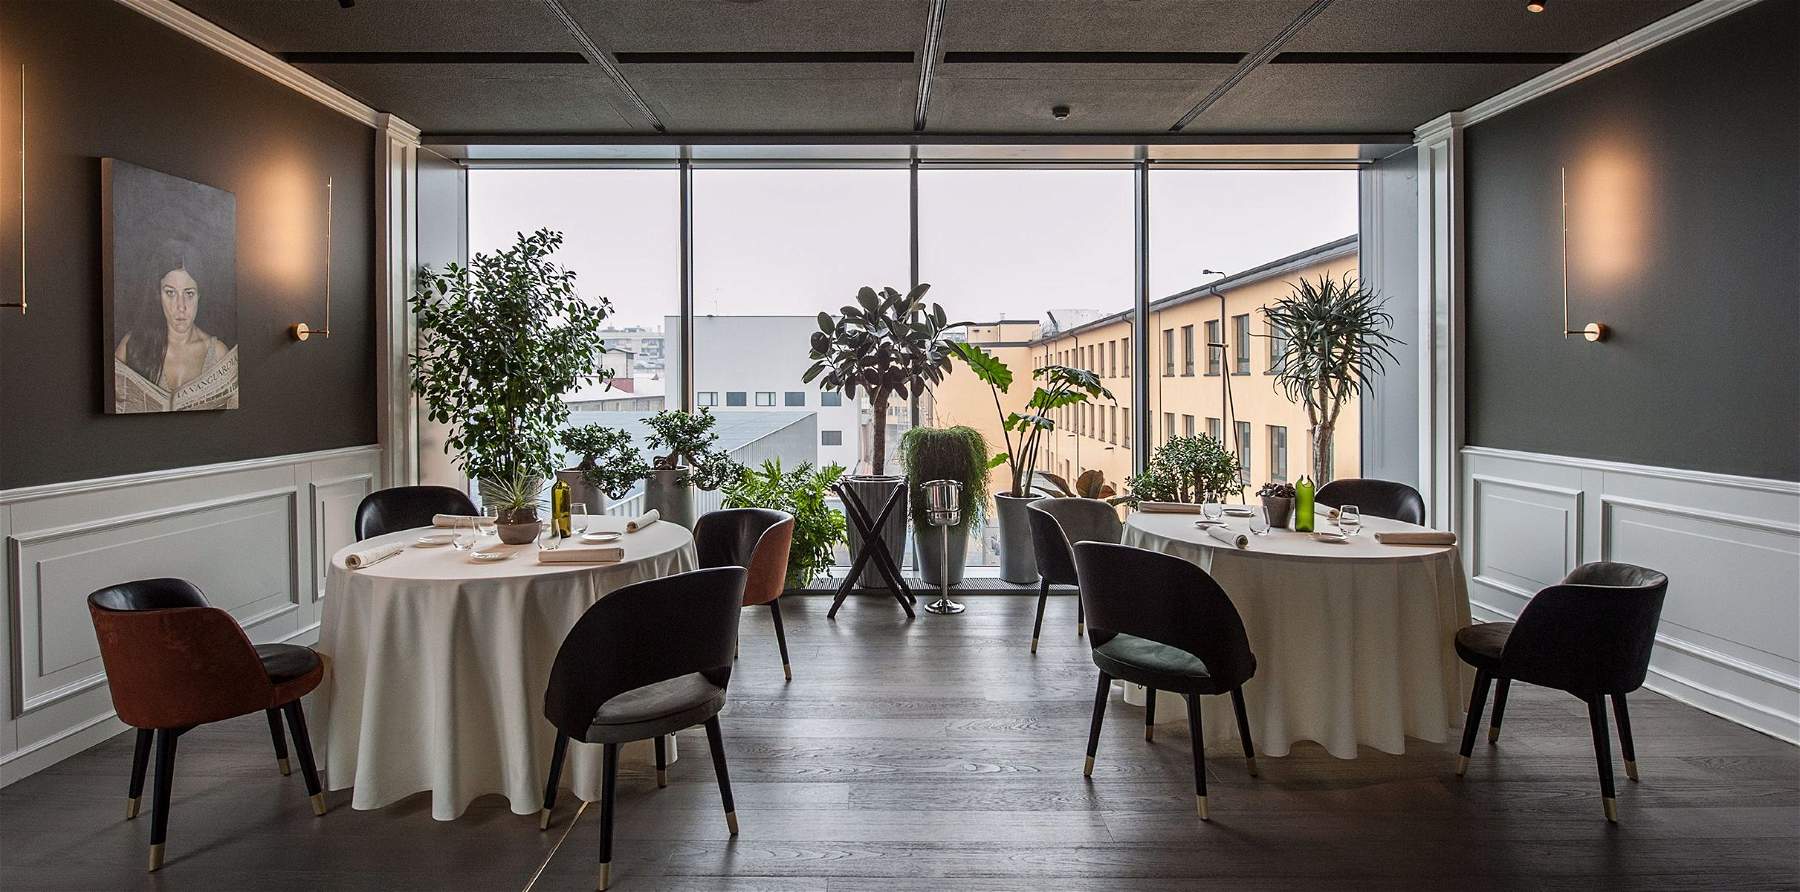 There's a museum that now has a three-star Michelin restaurant: it's Milan's Mudec 